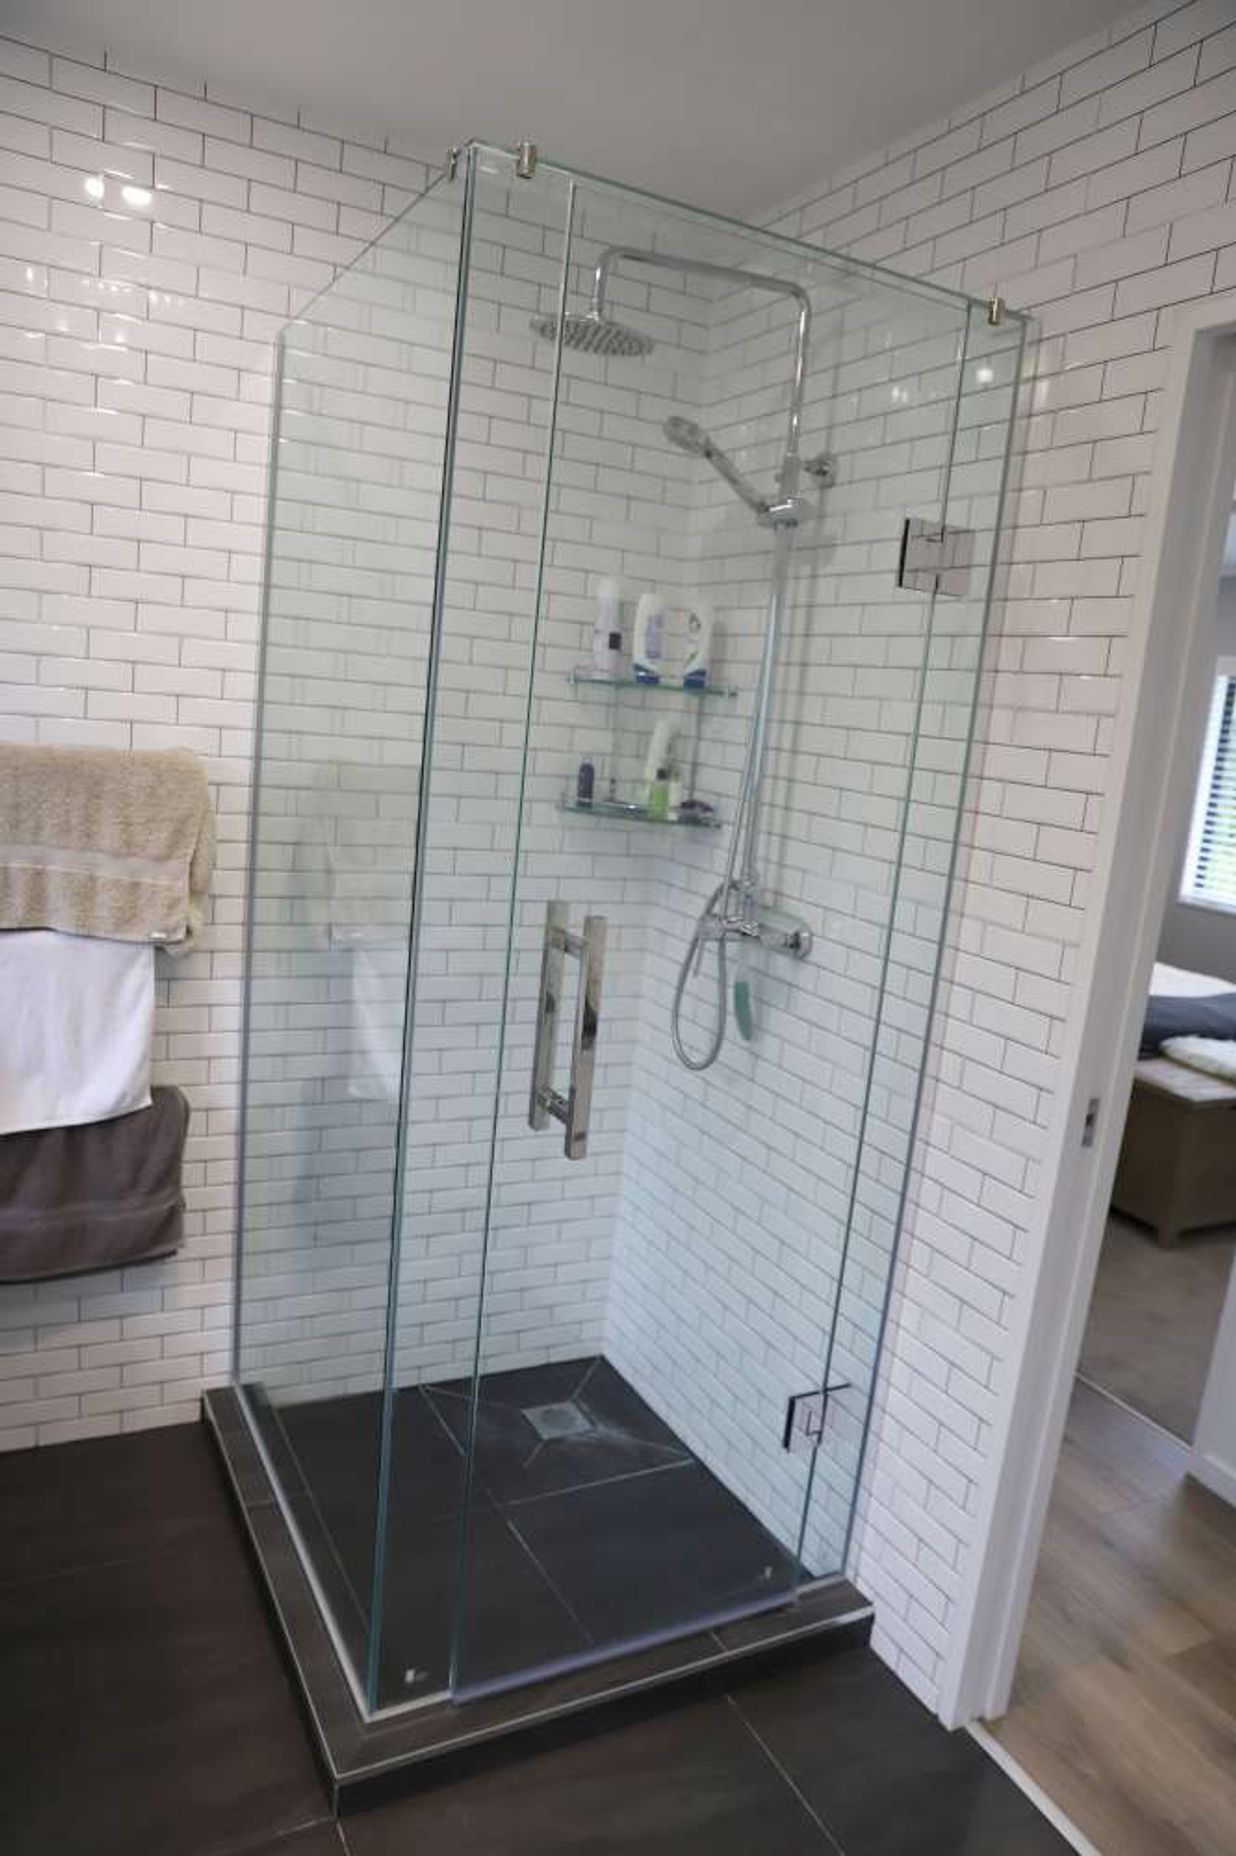 The installation of a pocket door enabled us to create this shower on the left side of the door.